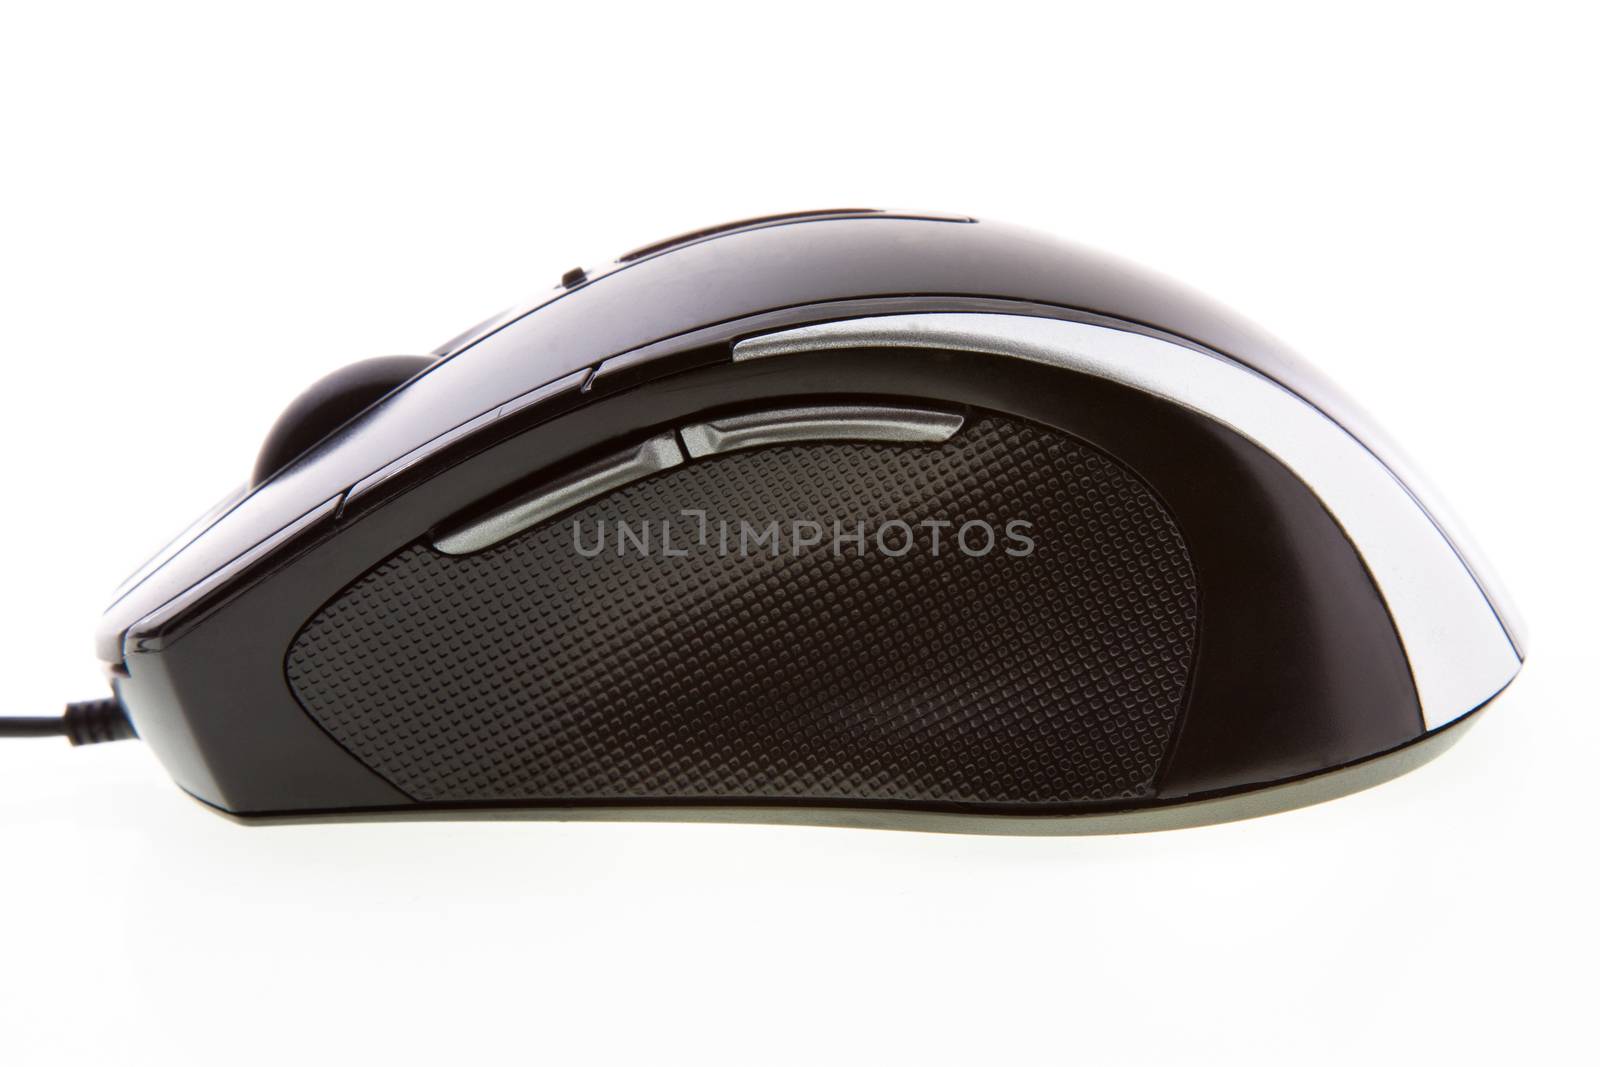   computer mouse  by avq